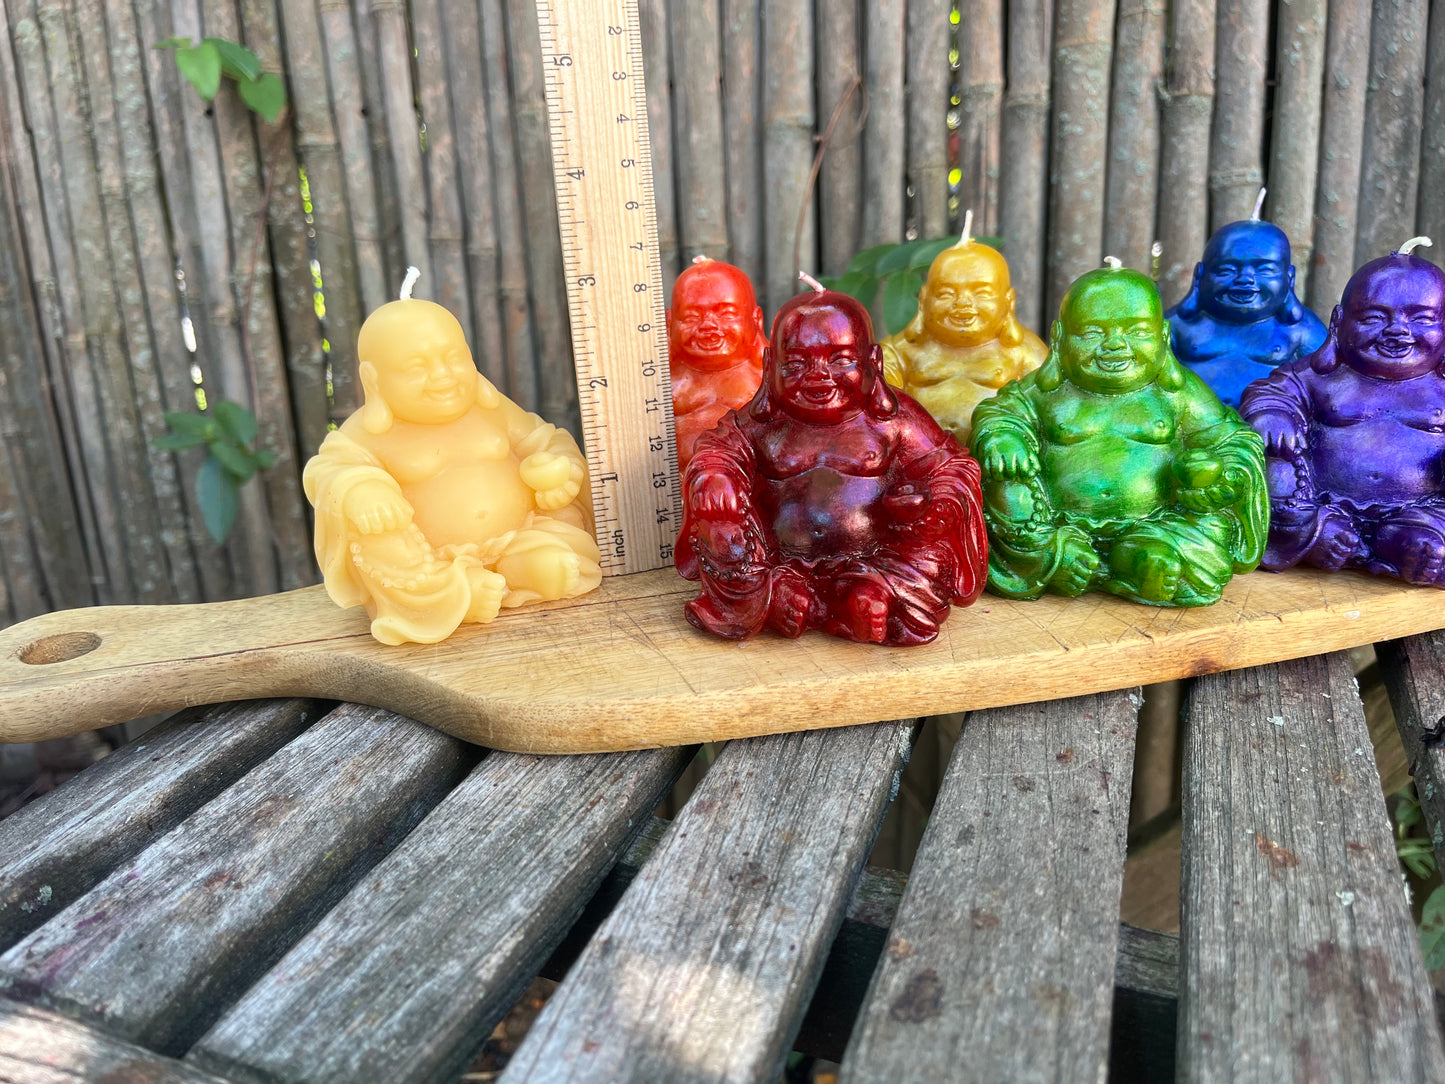 100% Pure Beeswax Smiling Laughing Buddha Candle